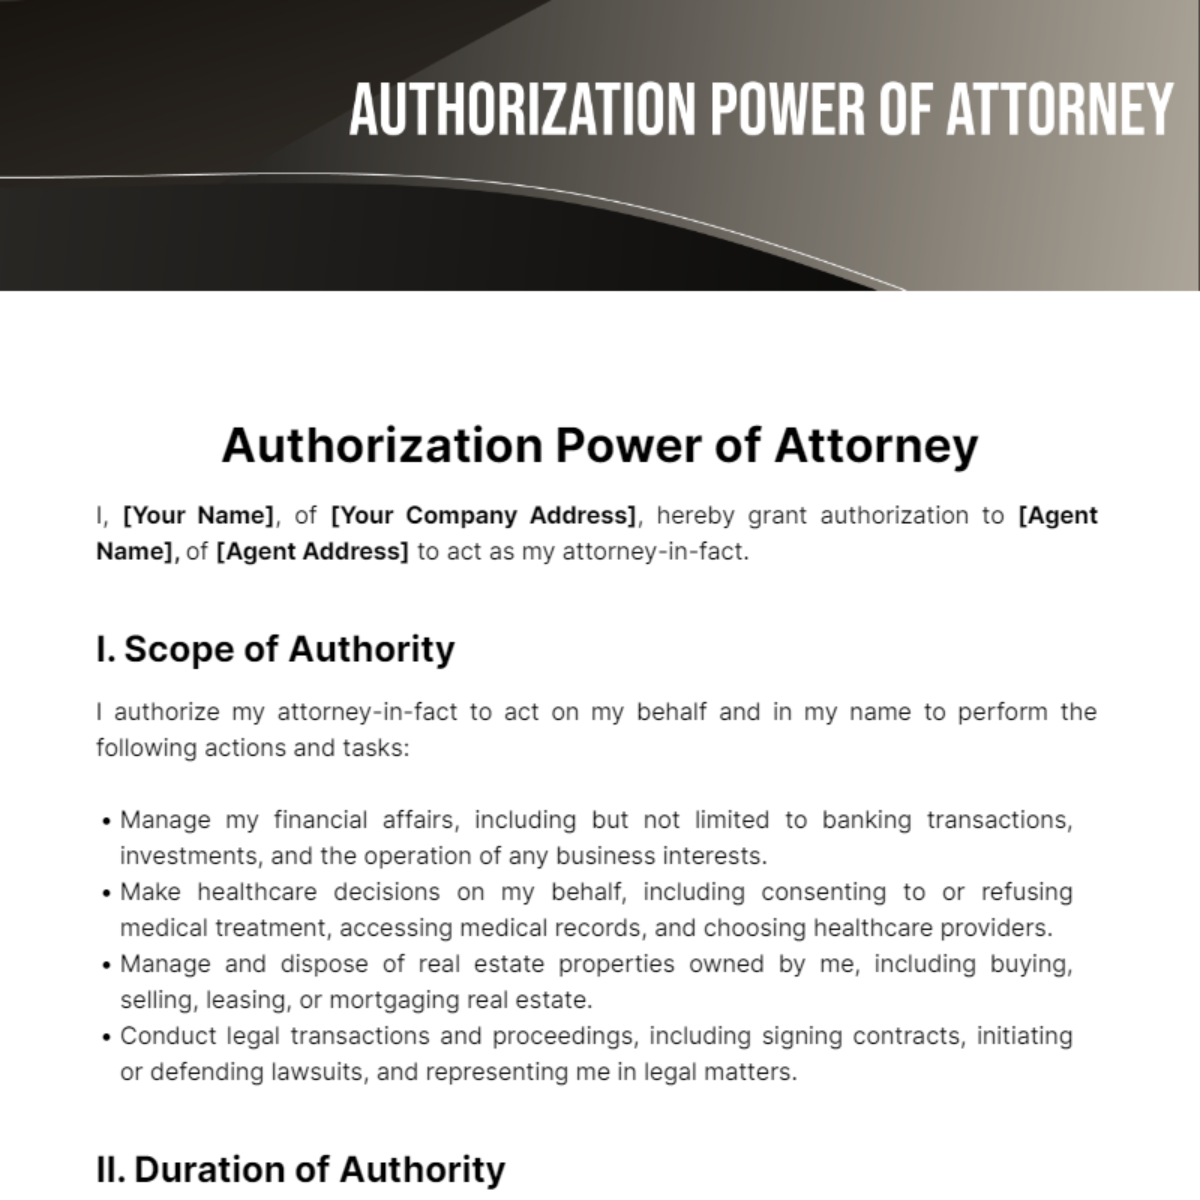 Authorization Power of Attorney Template